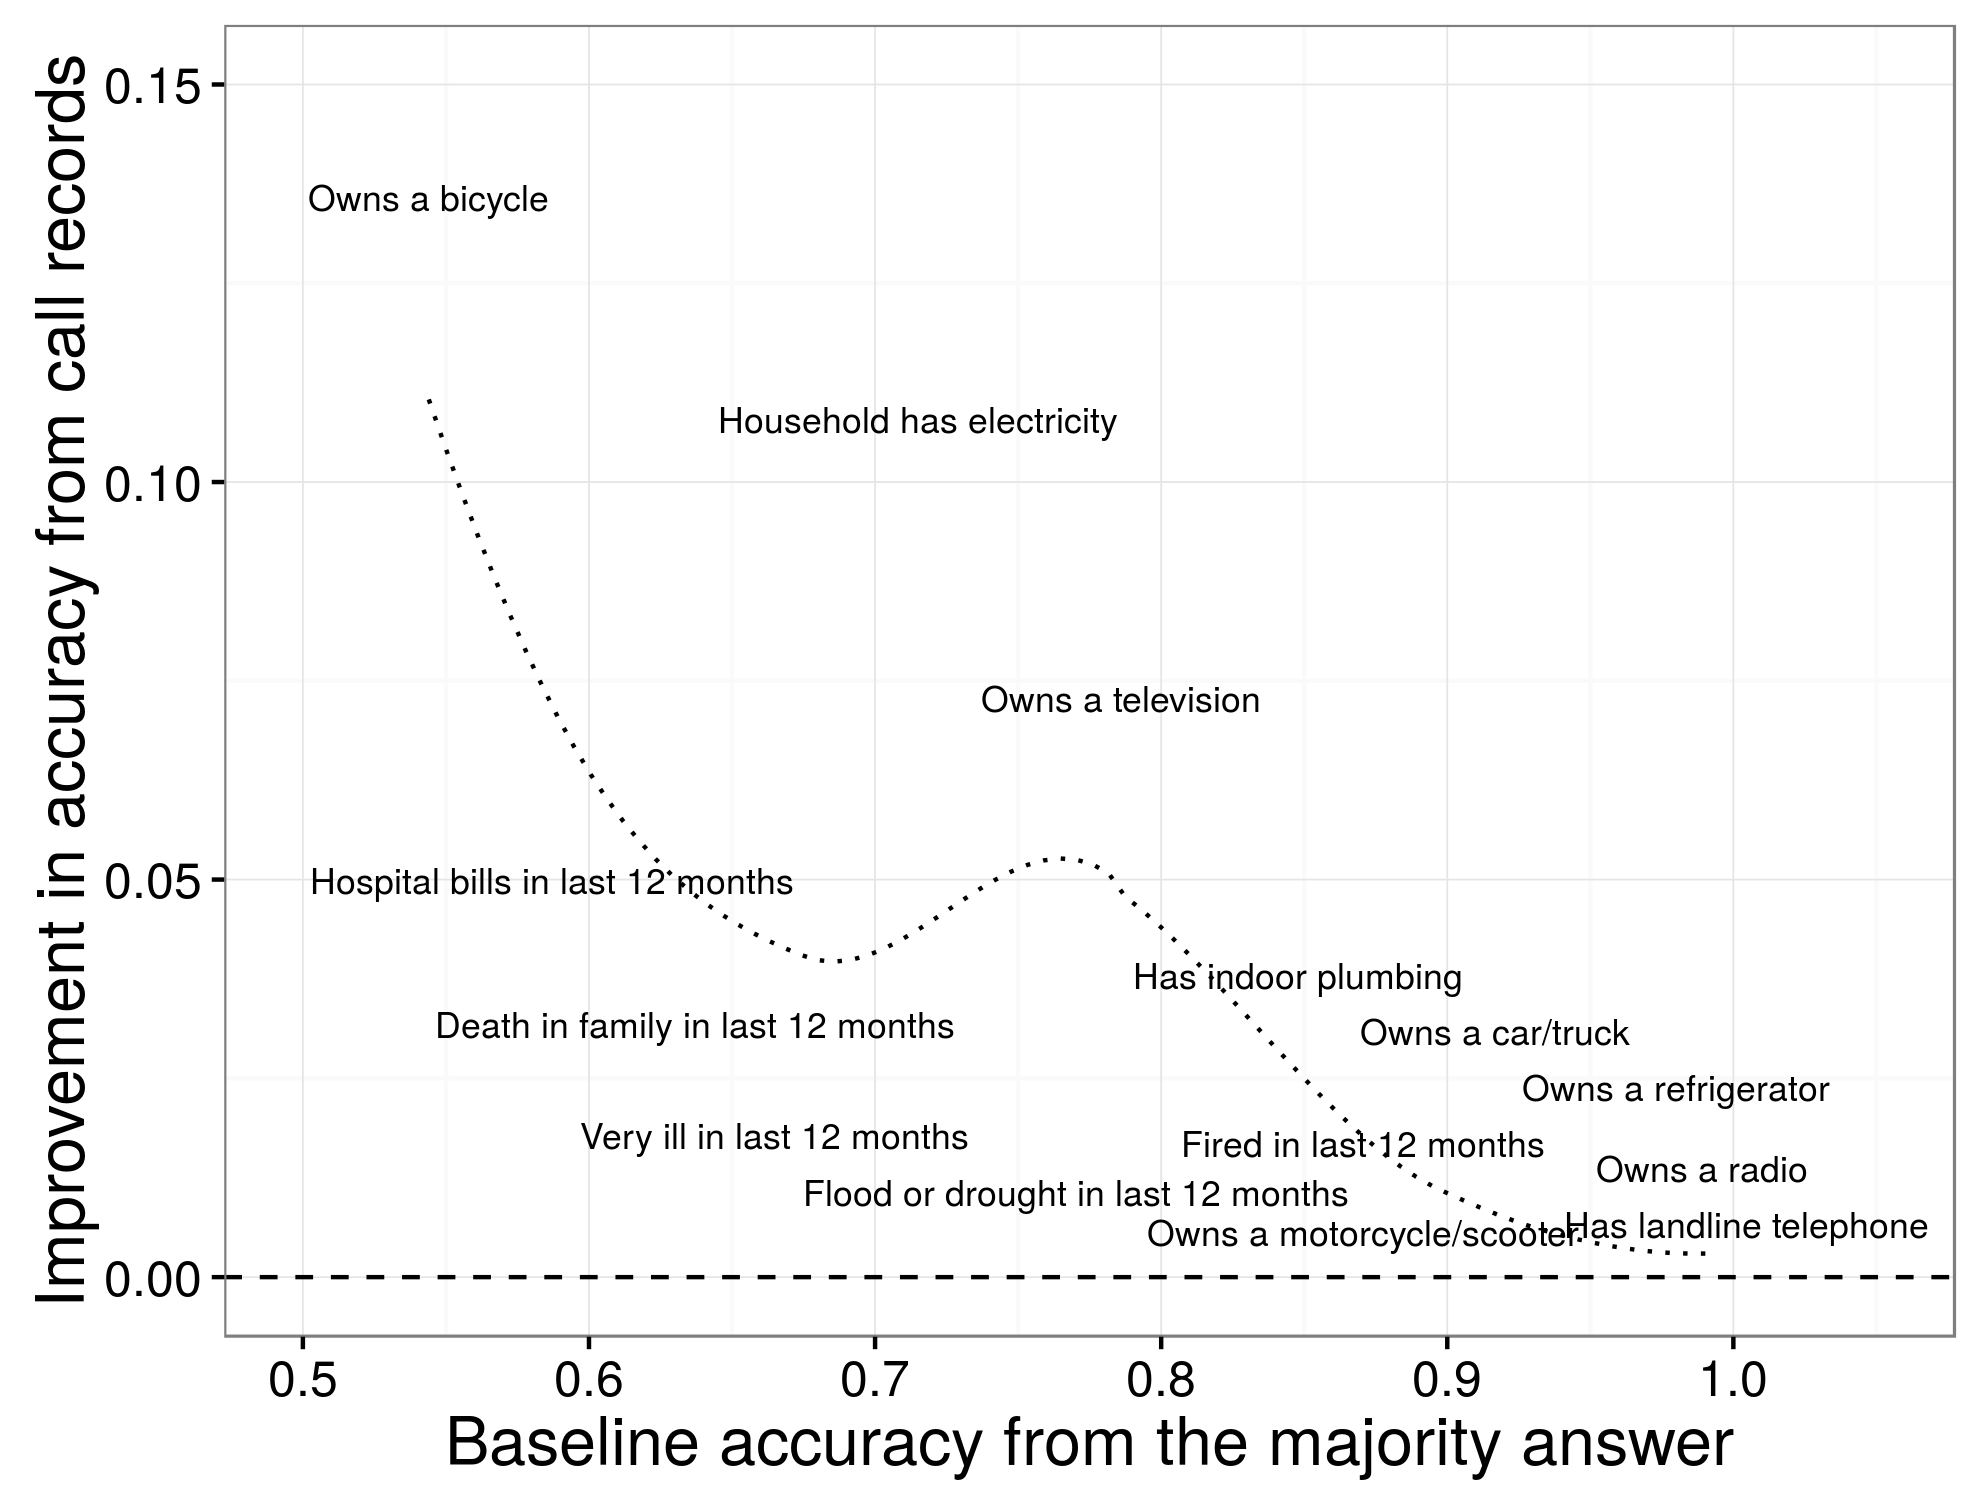 Figure 3.12: Comparison of predictive accuracy for statistical model trained with call records to simple baseline prediction. Points are slightly jittered to avoid overlap; see Table 2 of Blumenstock (2014) for exact values.